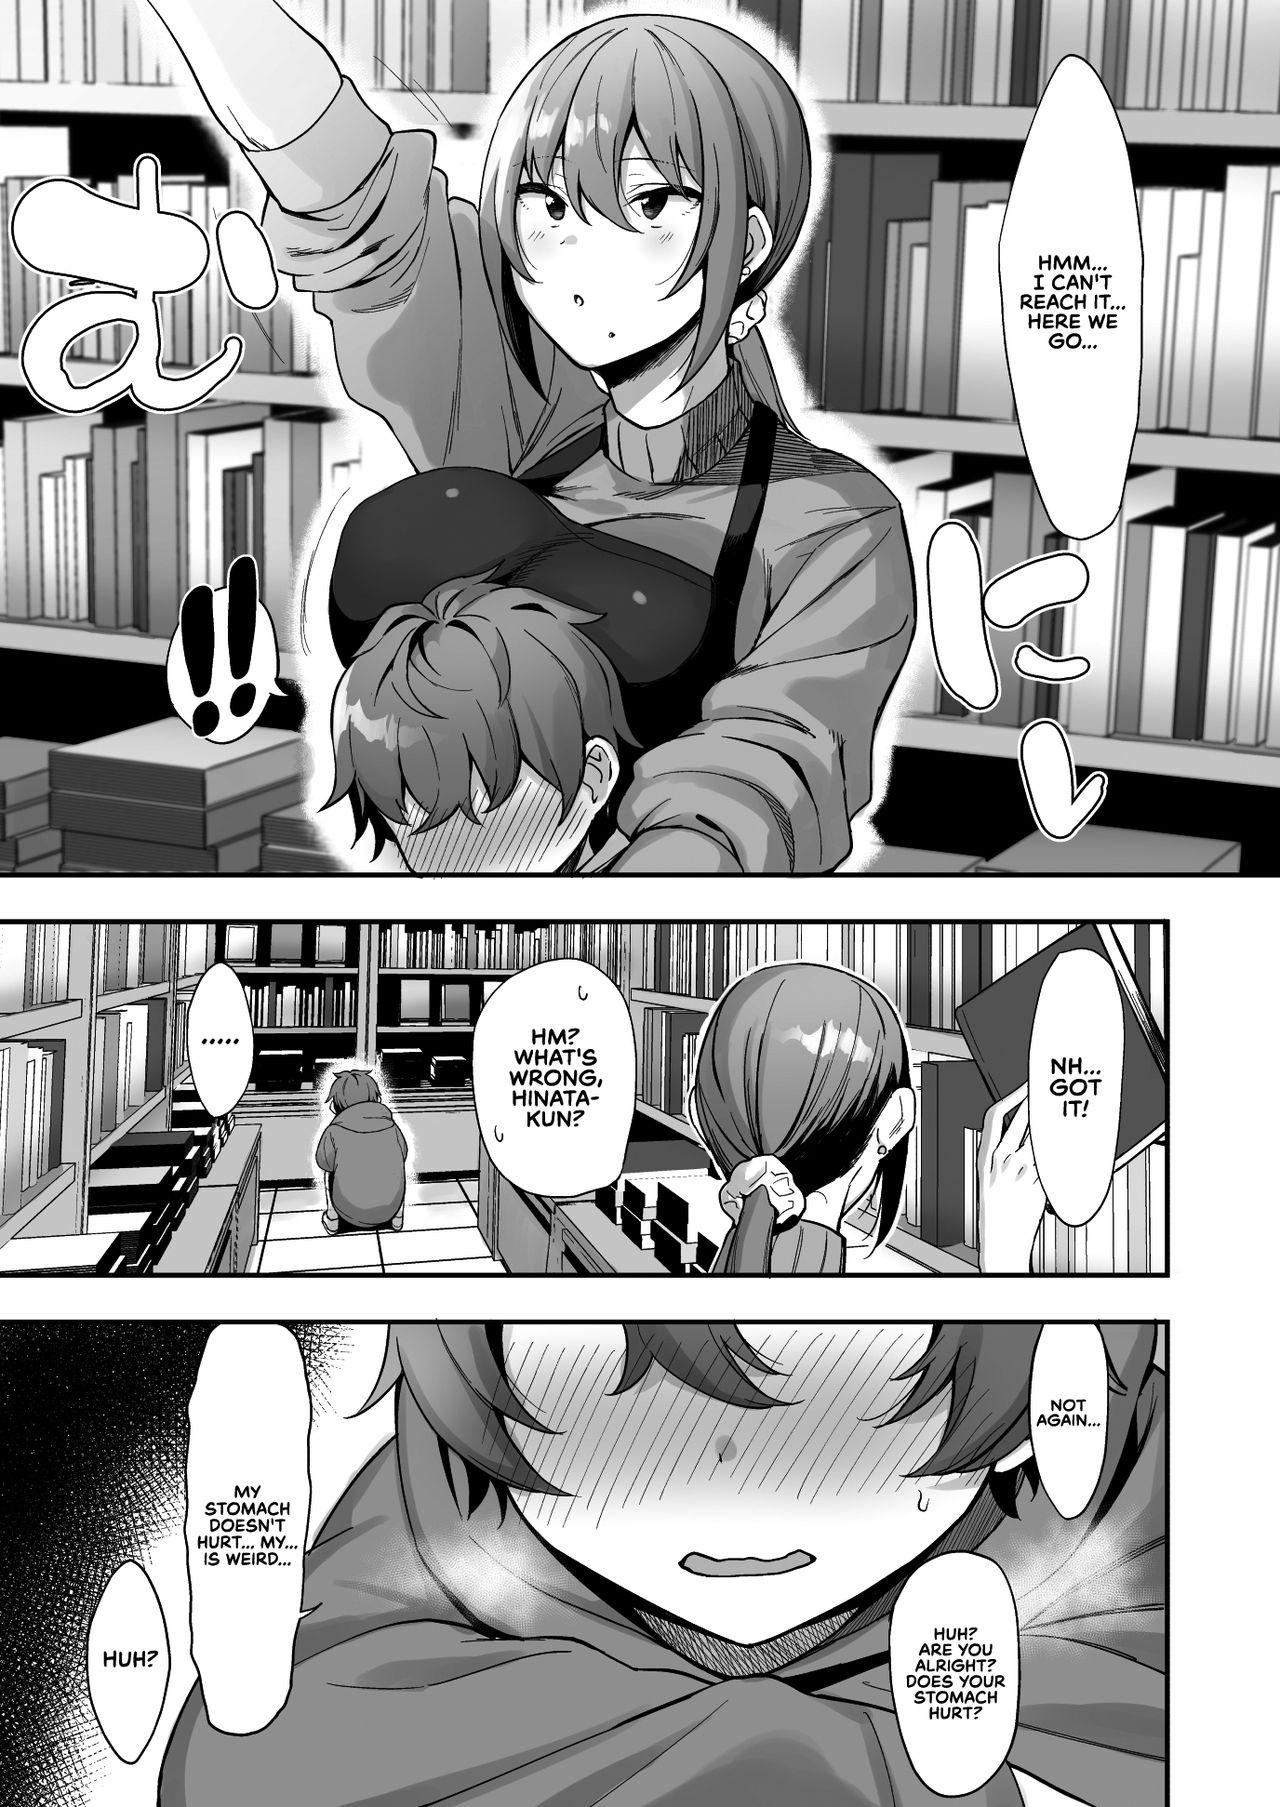 Shecock Furuhonya no Onee-san to | With The Lady From The Used Book Shop - Original Gozo - Page 8